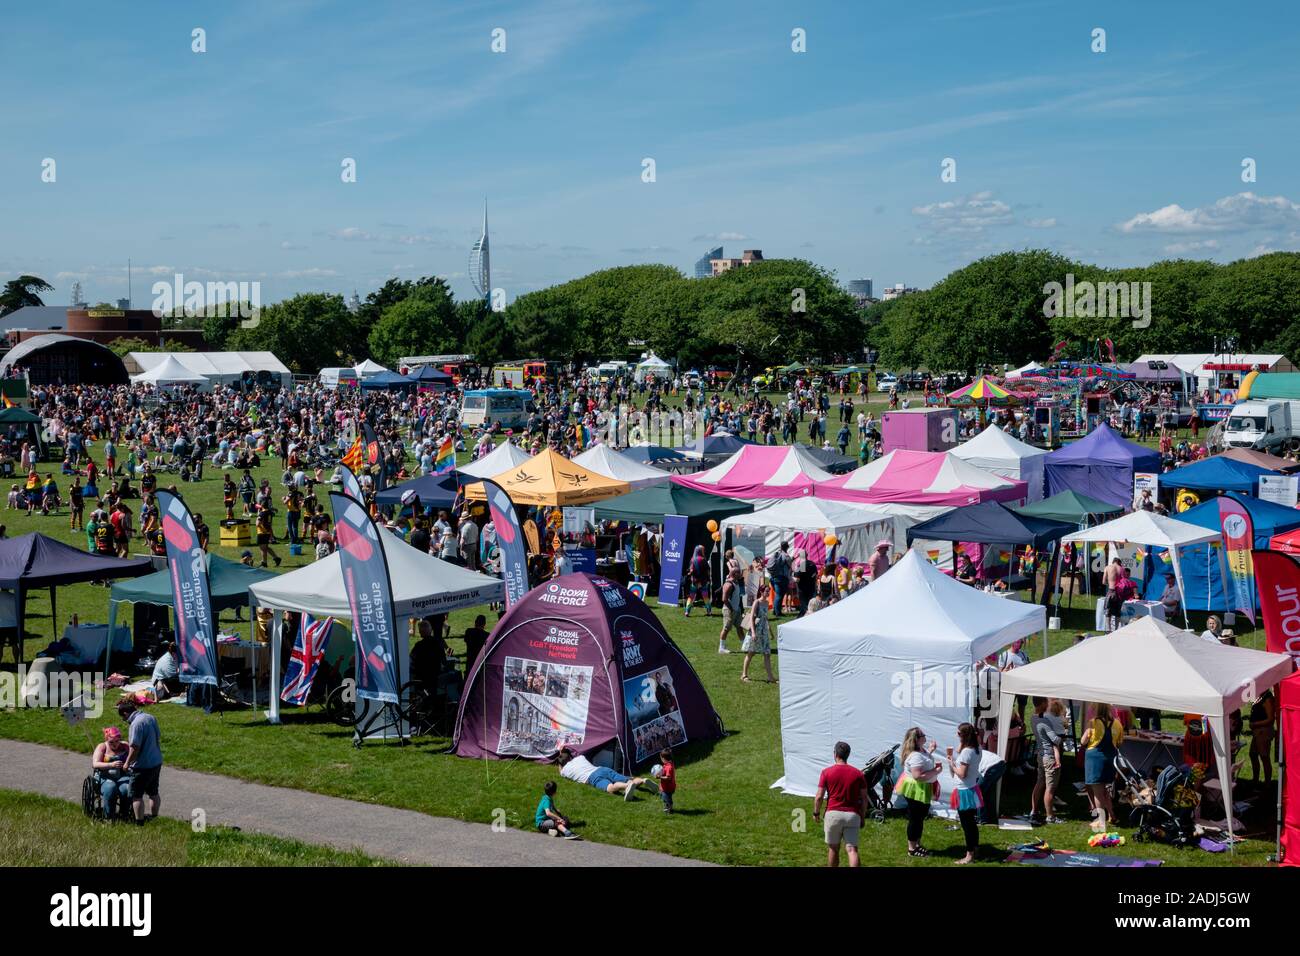 Crowds gather for Portsmouth Pride in Southsea to celebrate the LGBTQ+ community, with stalls and stands and stage performance Stock Photo